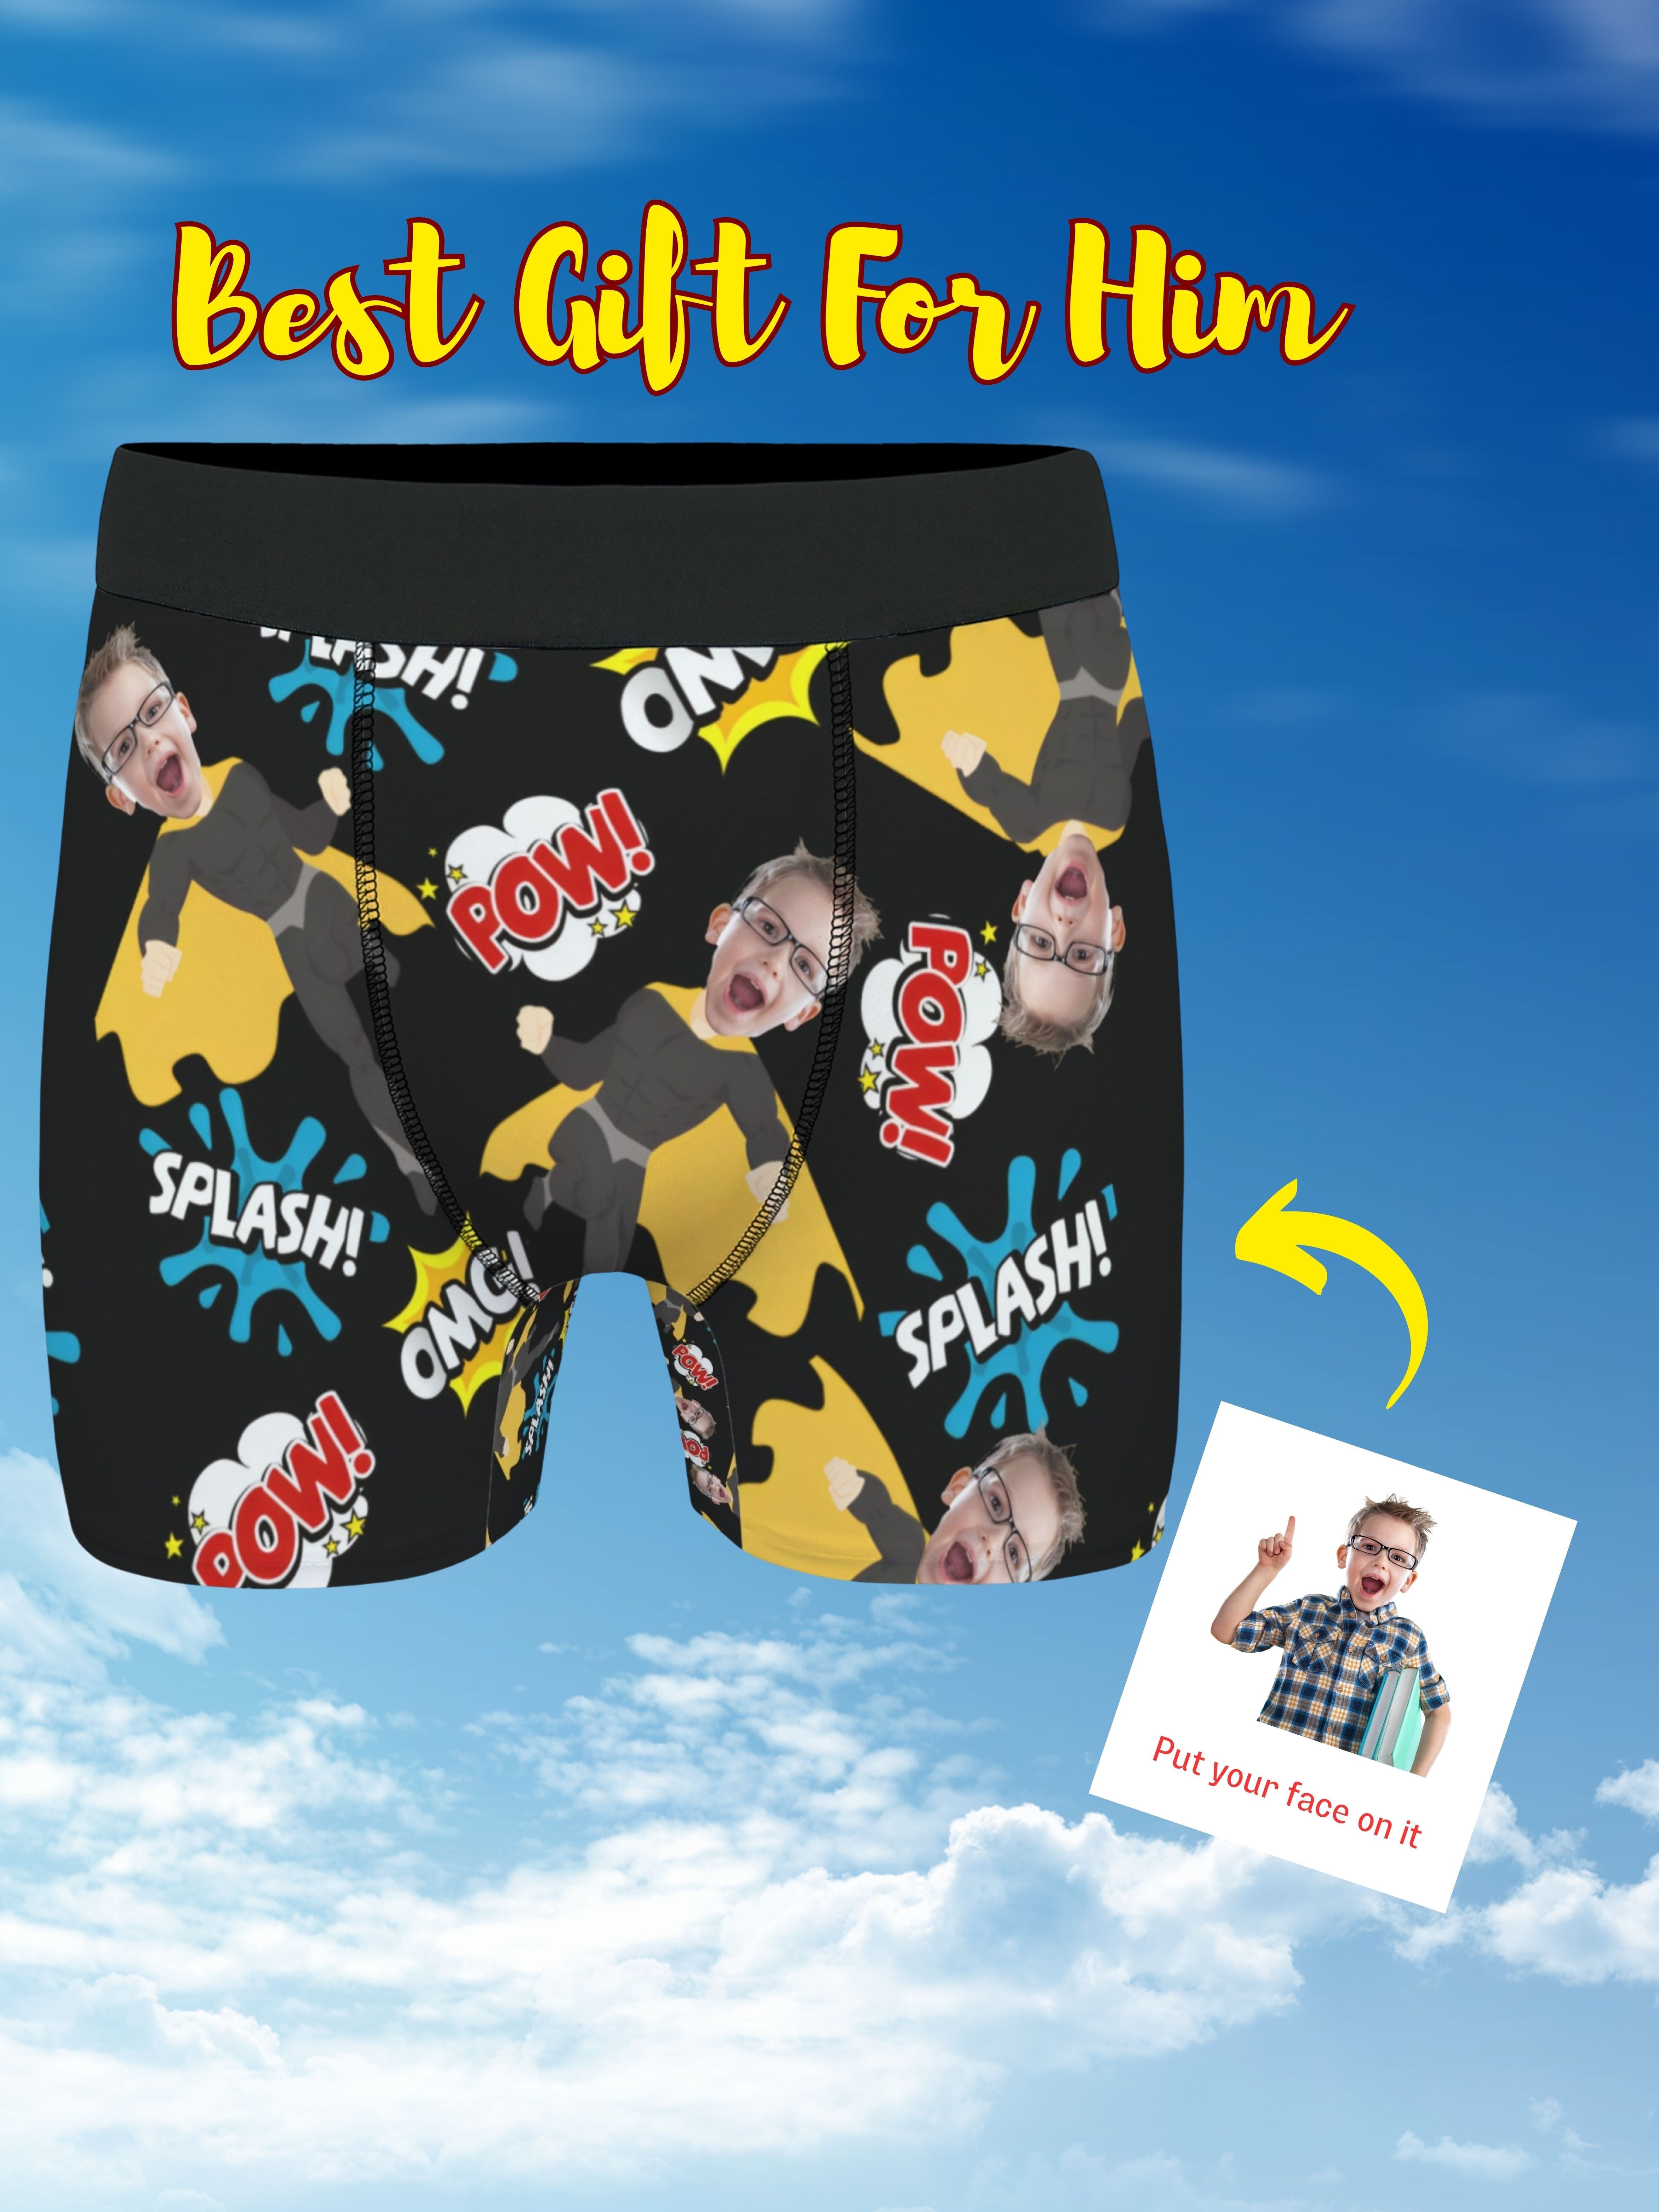 Custom Underwear Personalized Face Boxer Briefs for Men with Photo